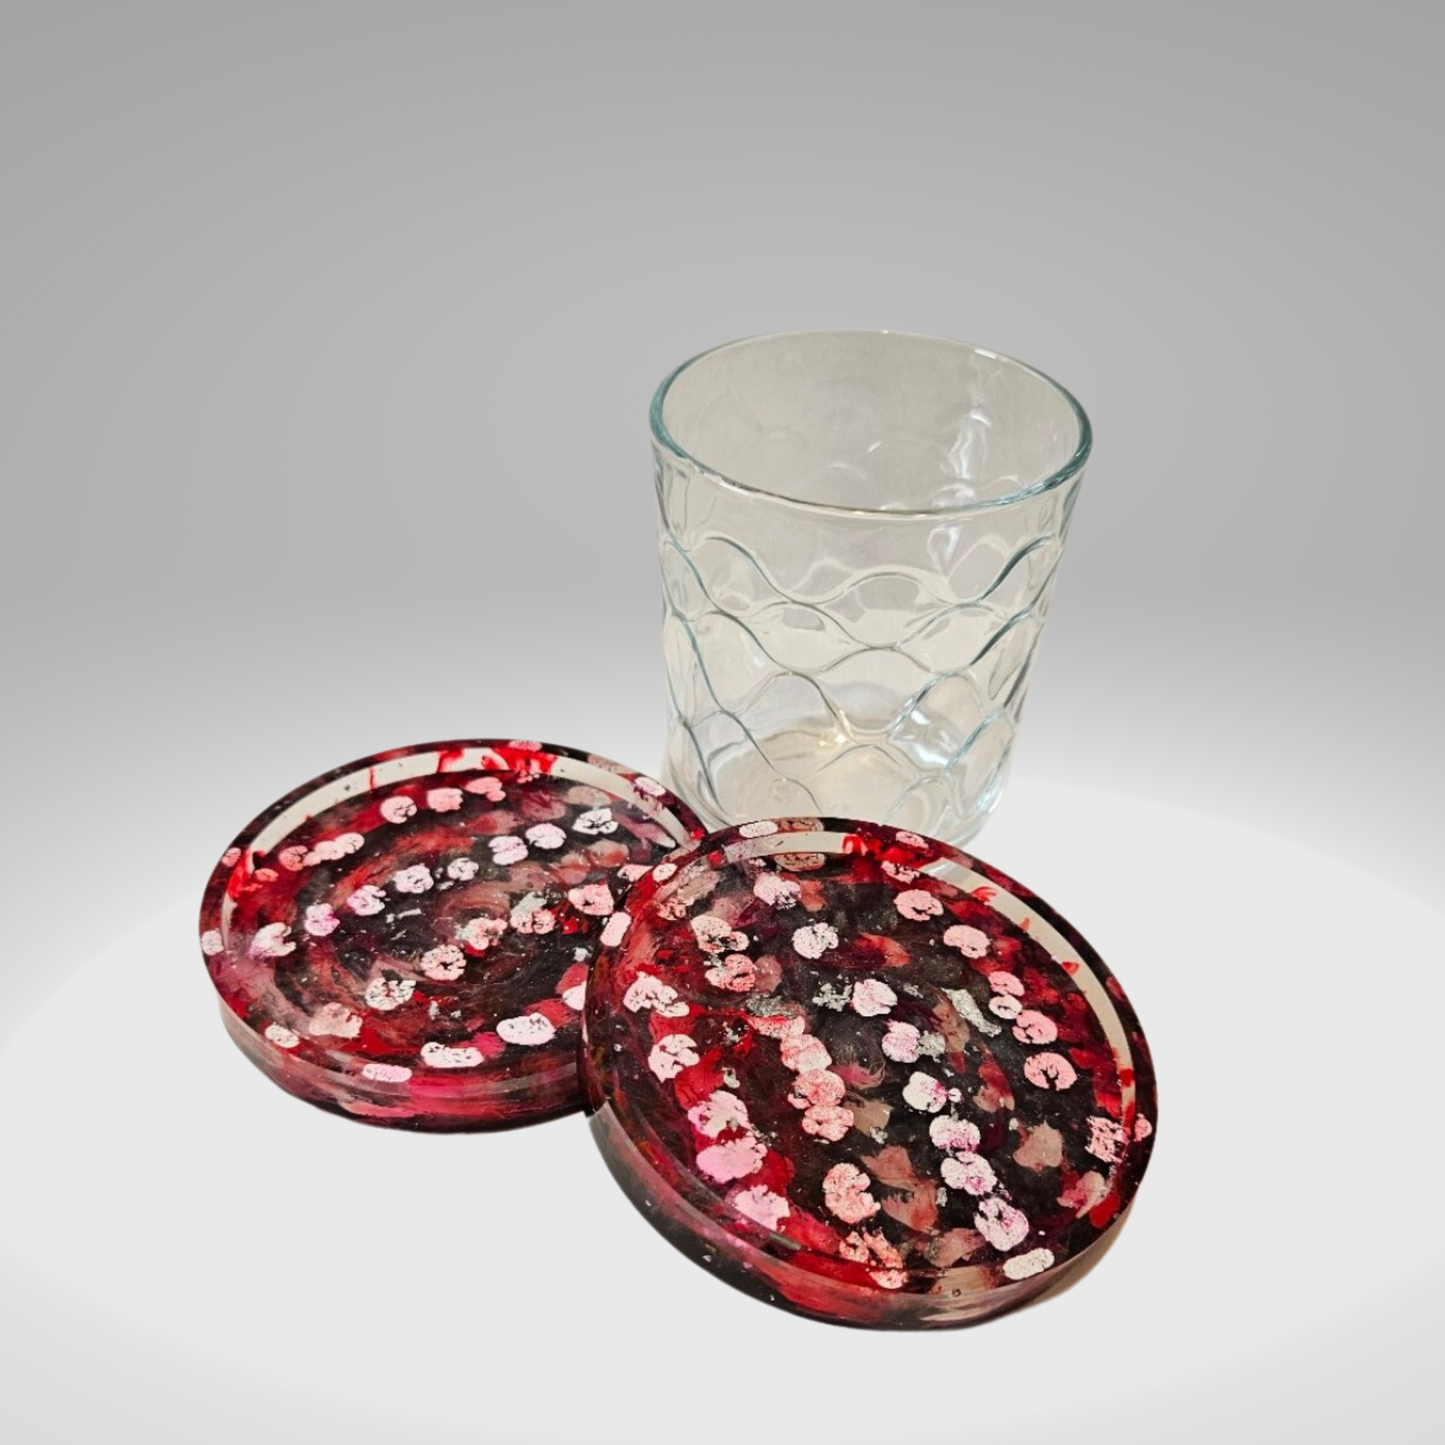 Red/white/black/silver Drink Coaster set (two)